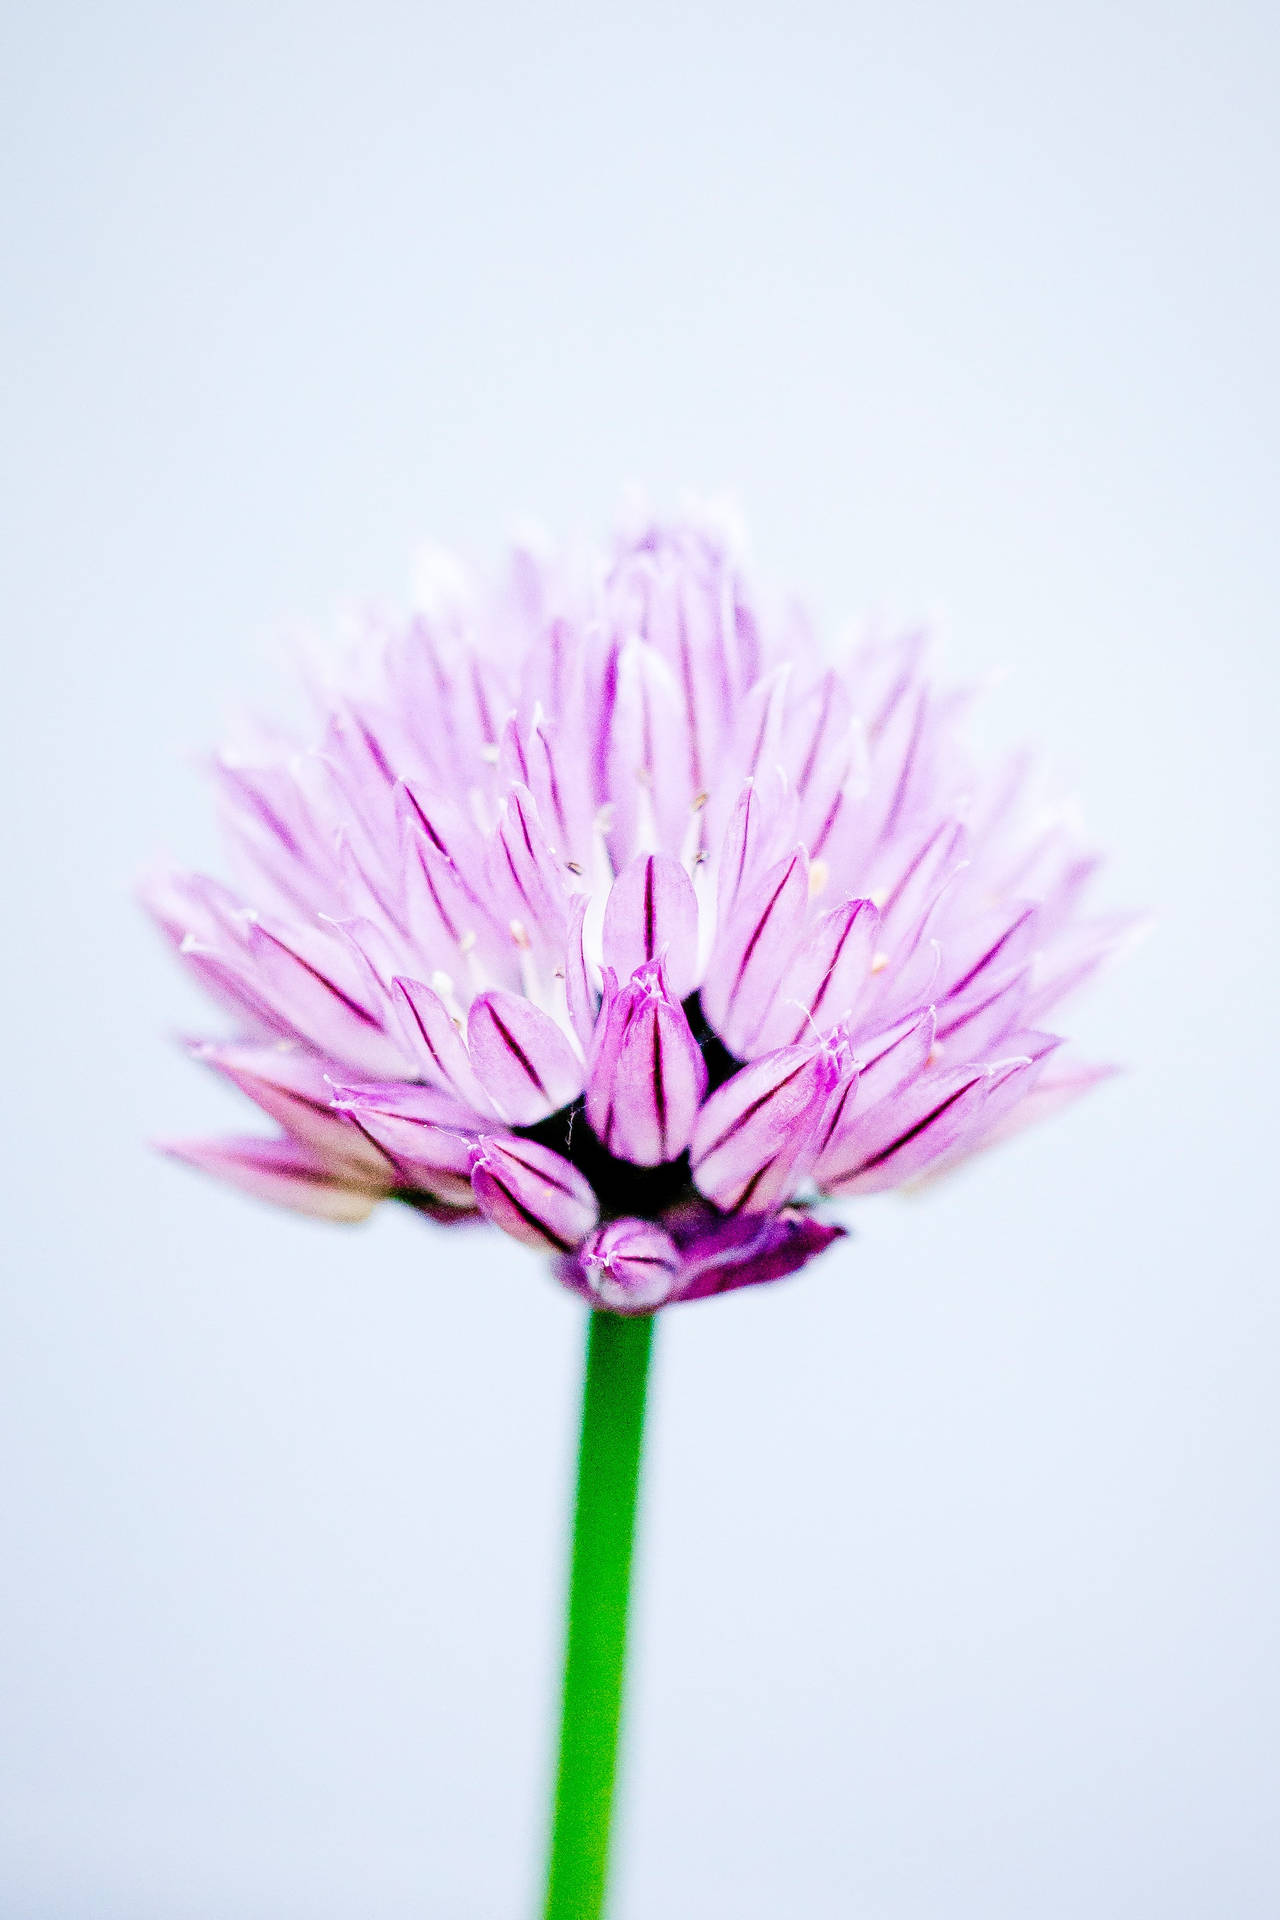 Chives Flower Android Wallpaper